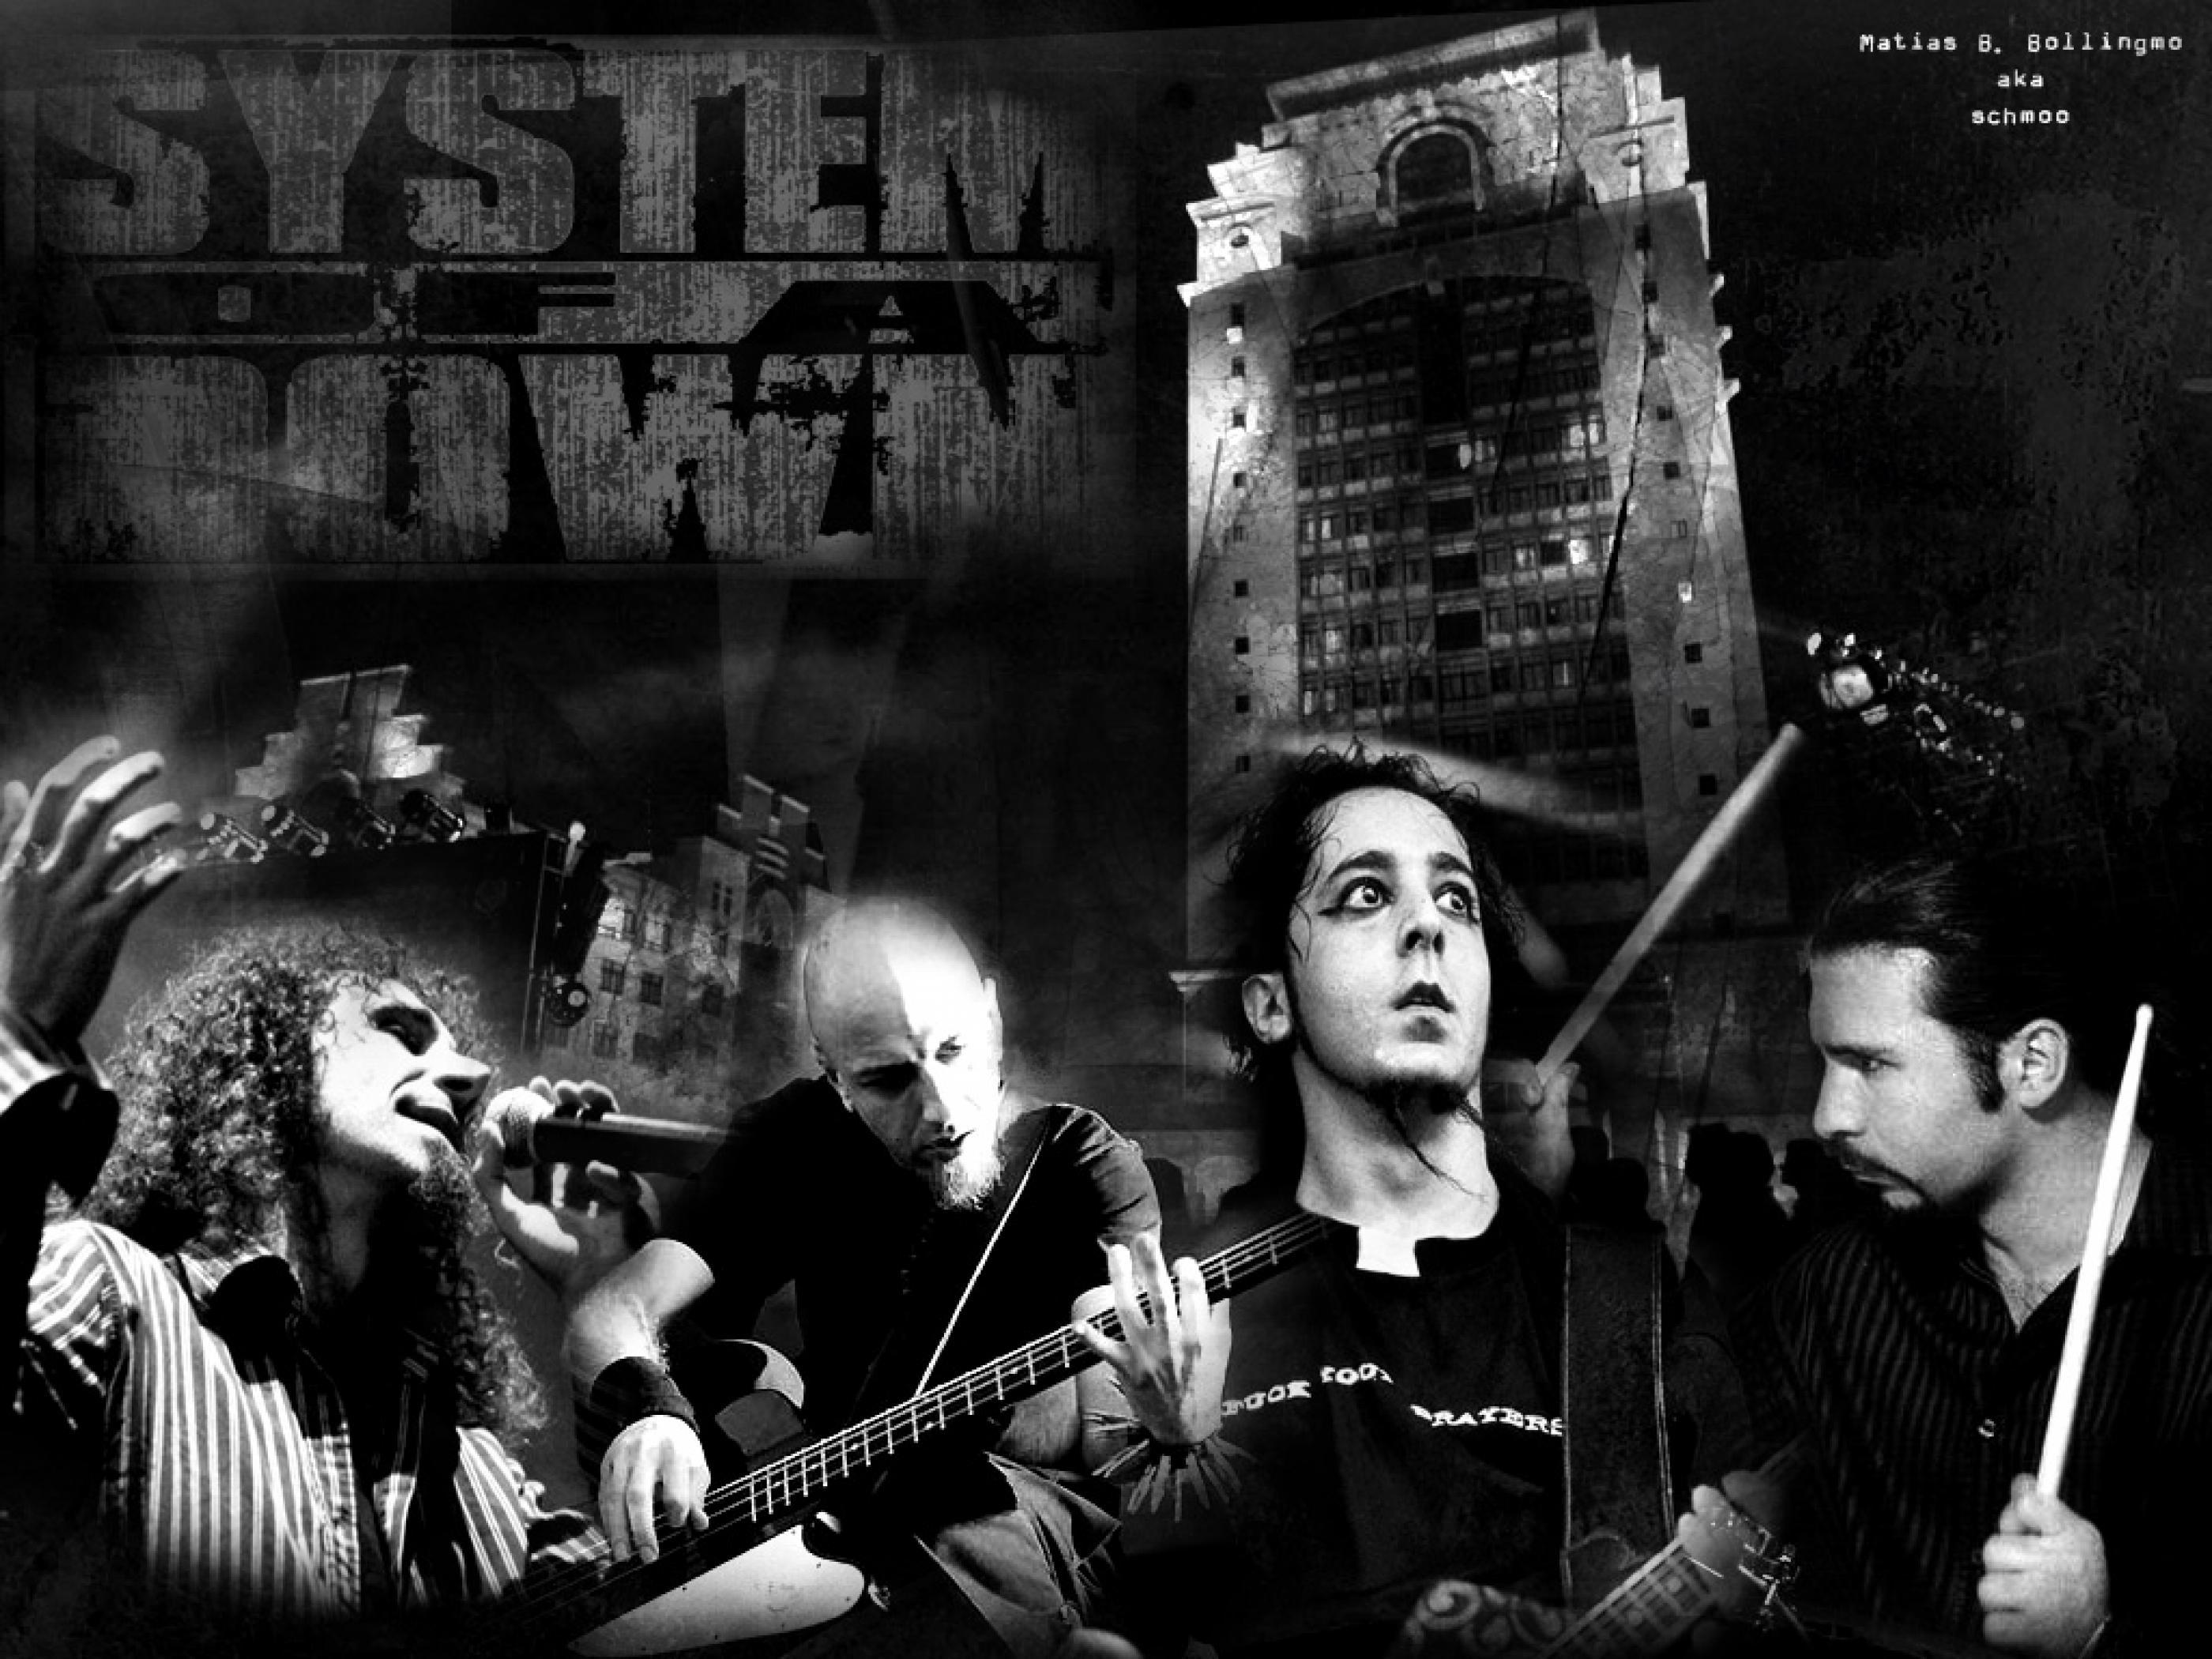 System of a down википедия. Группа System of a down. SOAD обои. System of a down Wallpaper. System of a down состав.